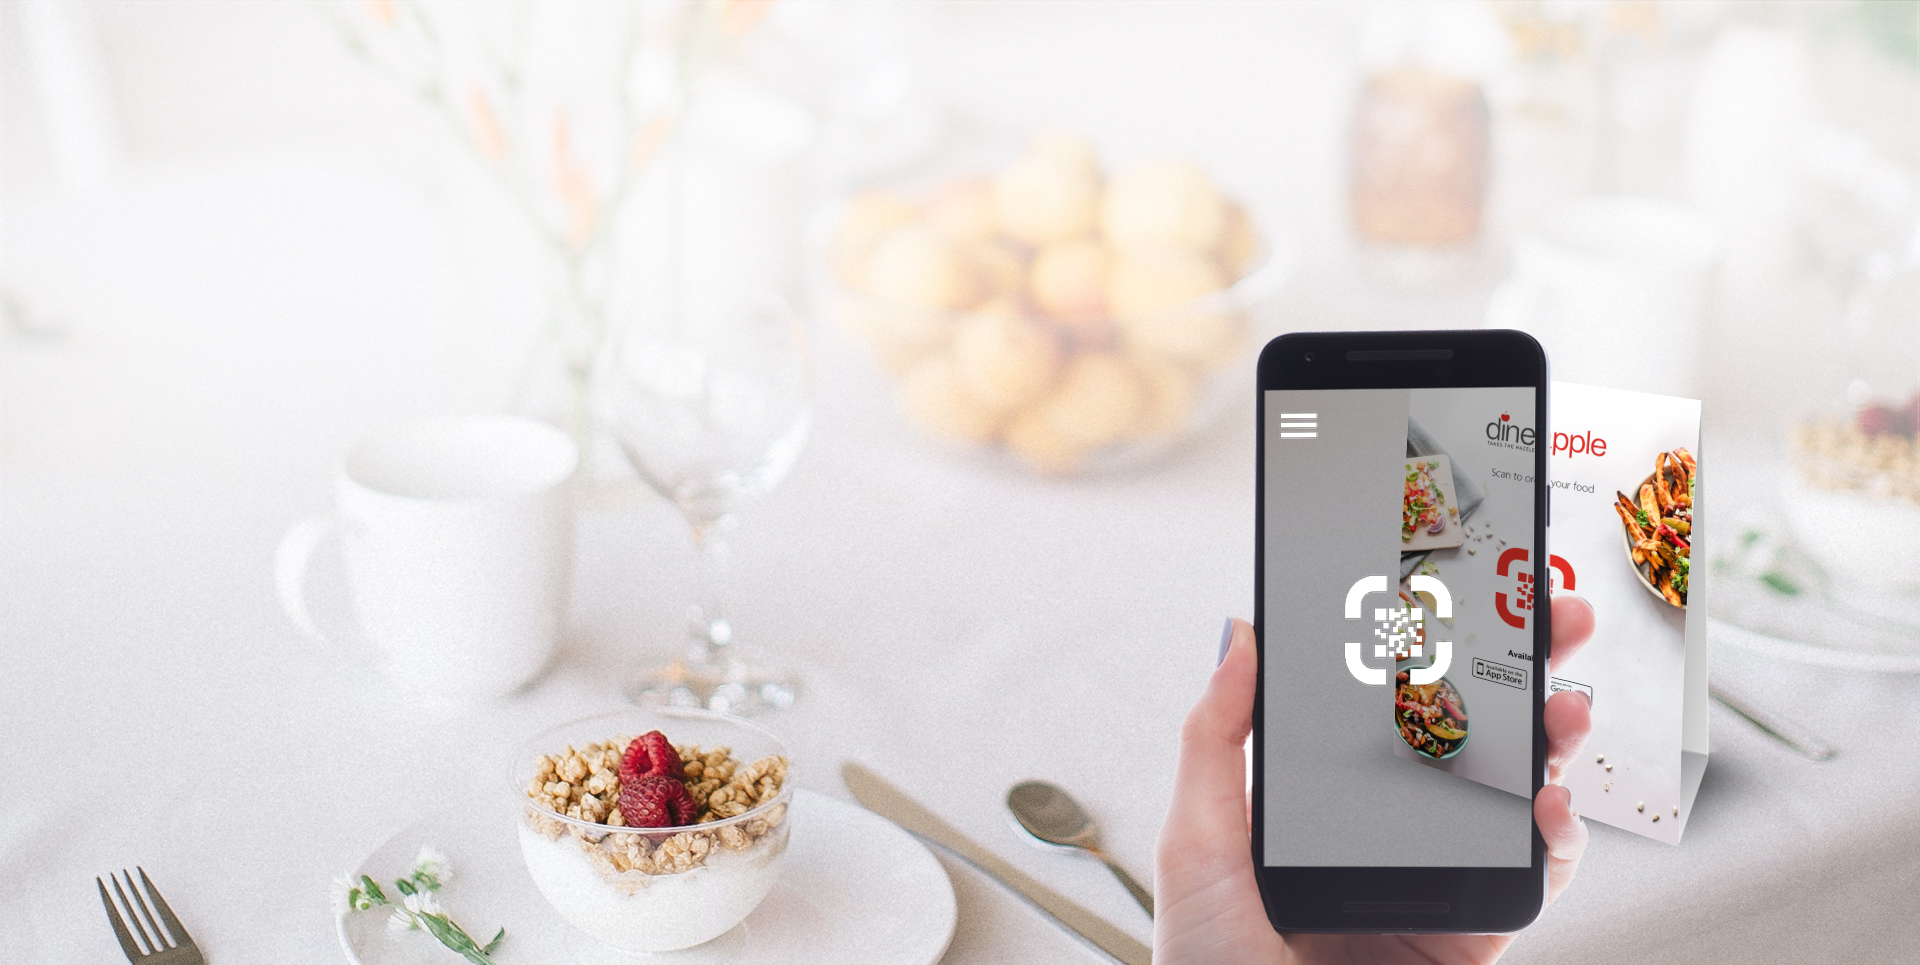 Give customers the ability to view the restaurant's menu from their phone by scanning the QR code and place their order at the push of a button.